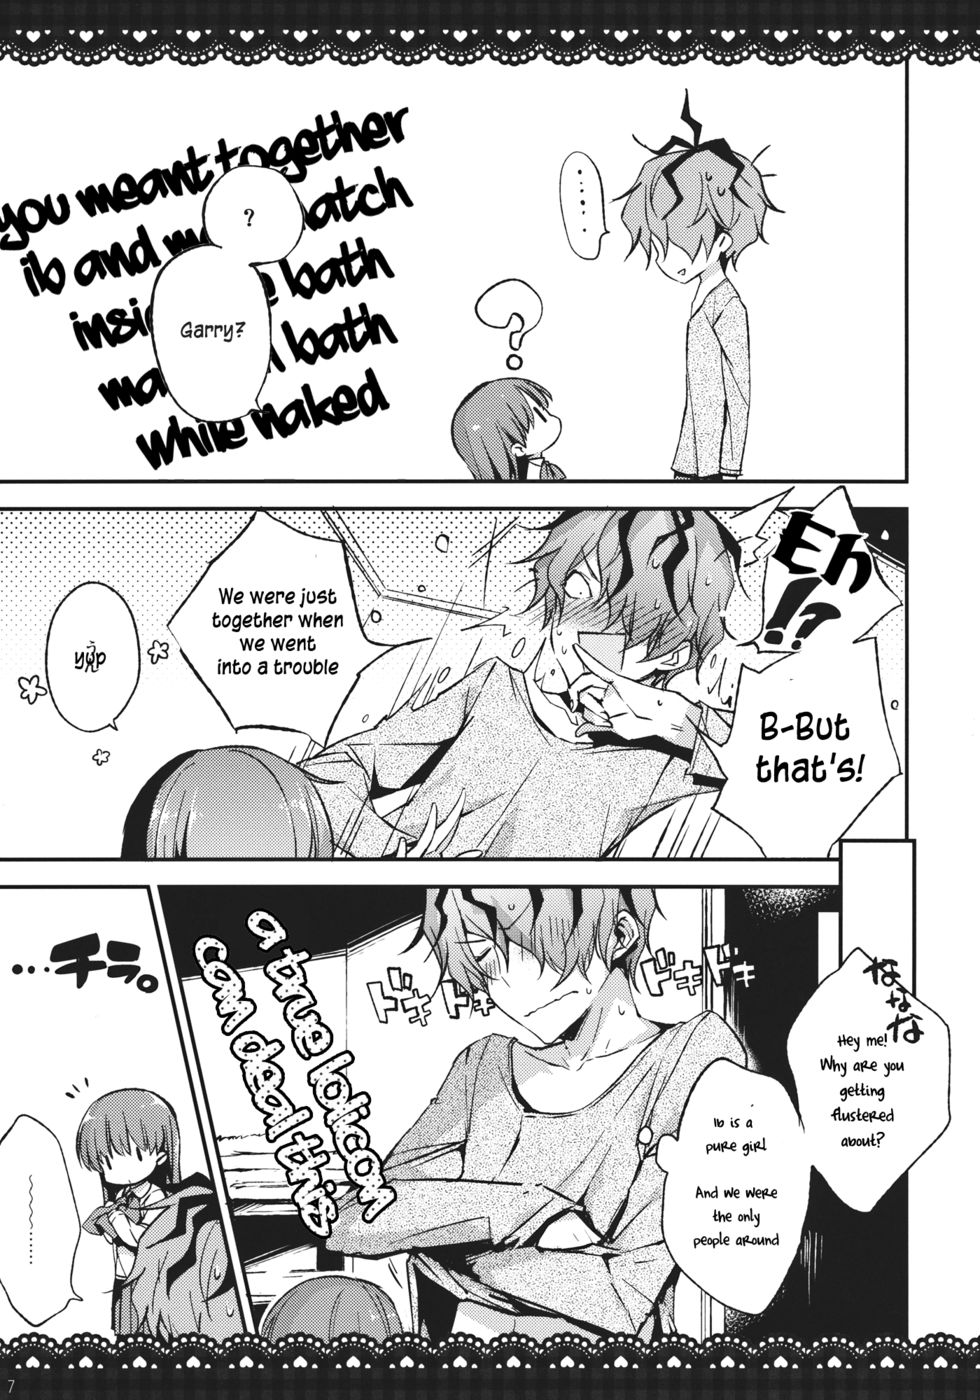 Hentai Manga Comic-What happens when you're in a bath together, Garry and Ib?-Read-6